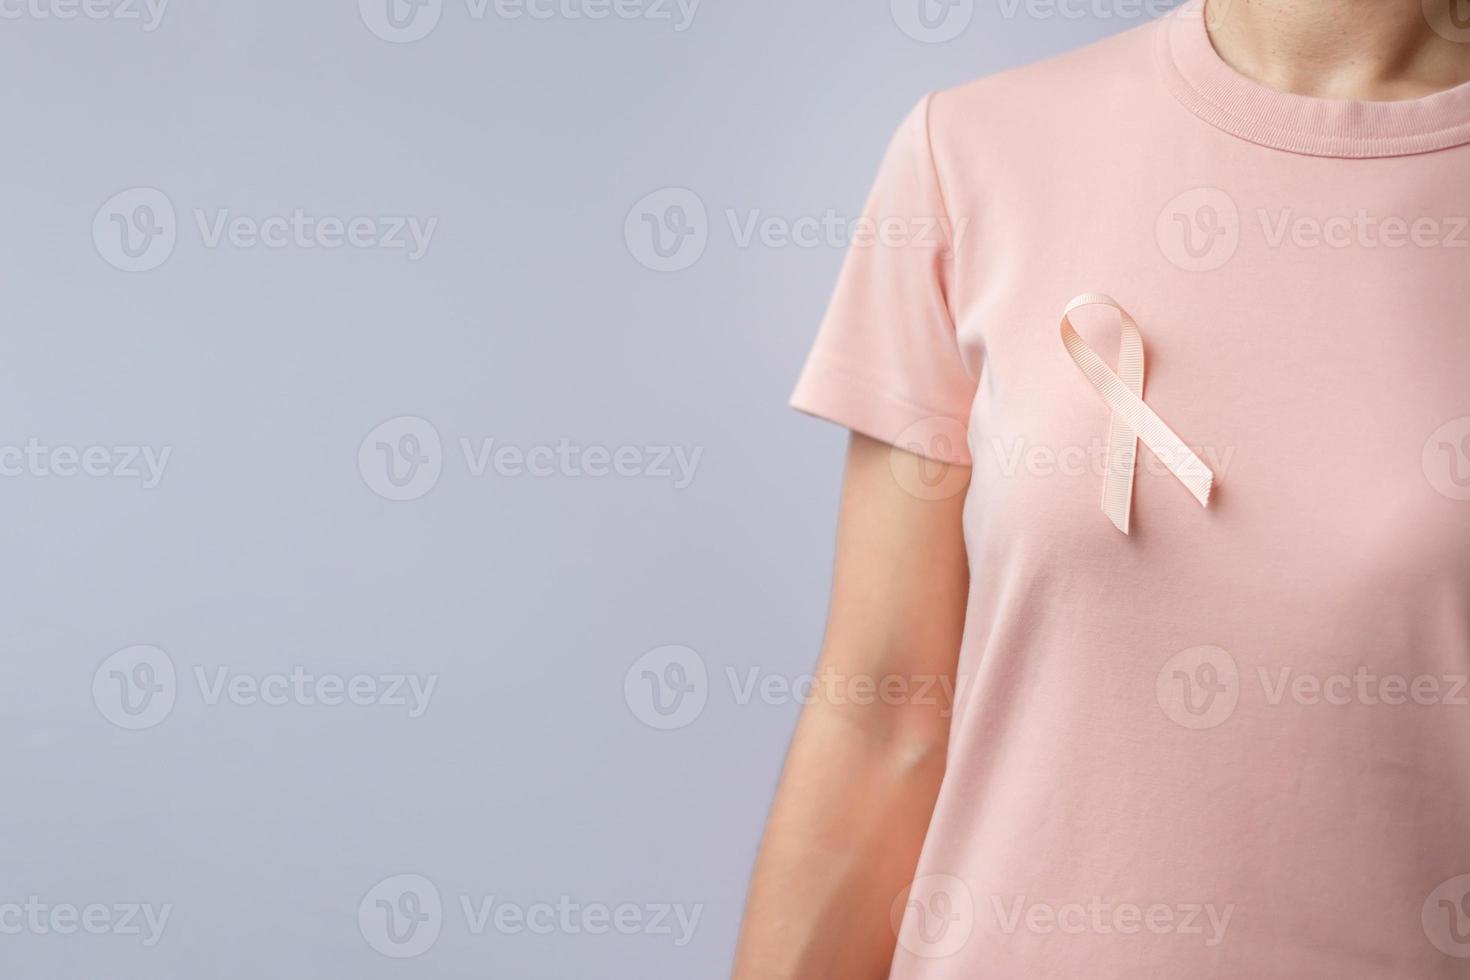 Peach Ribbon for September Uterine Cancer Awareness month. Healthcare and World cancer day concept photo